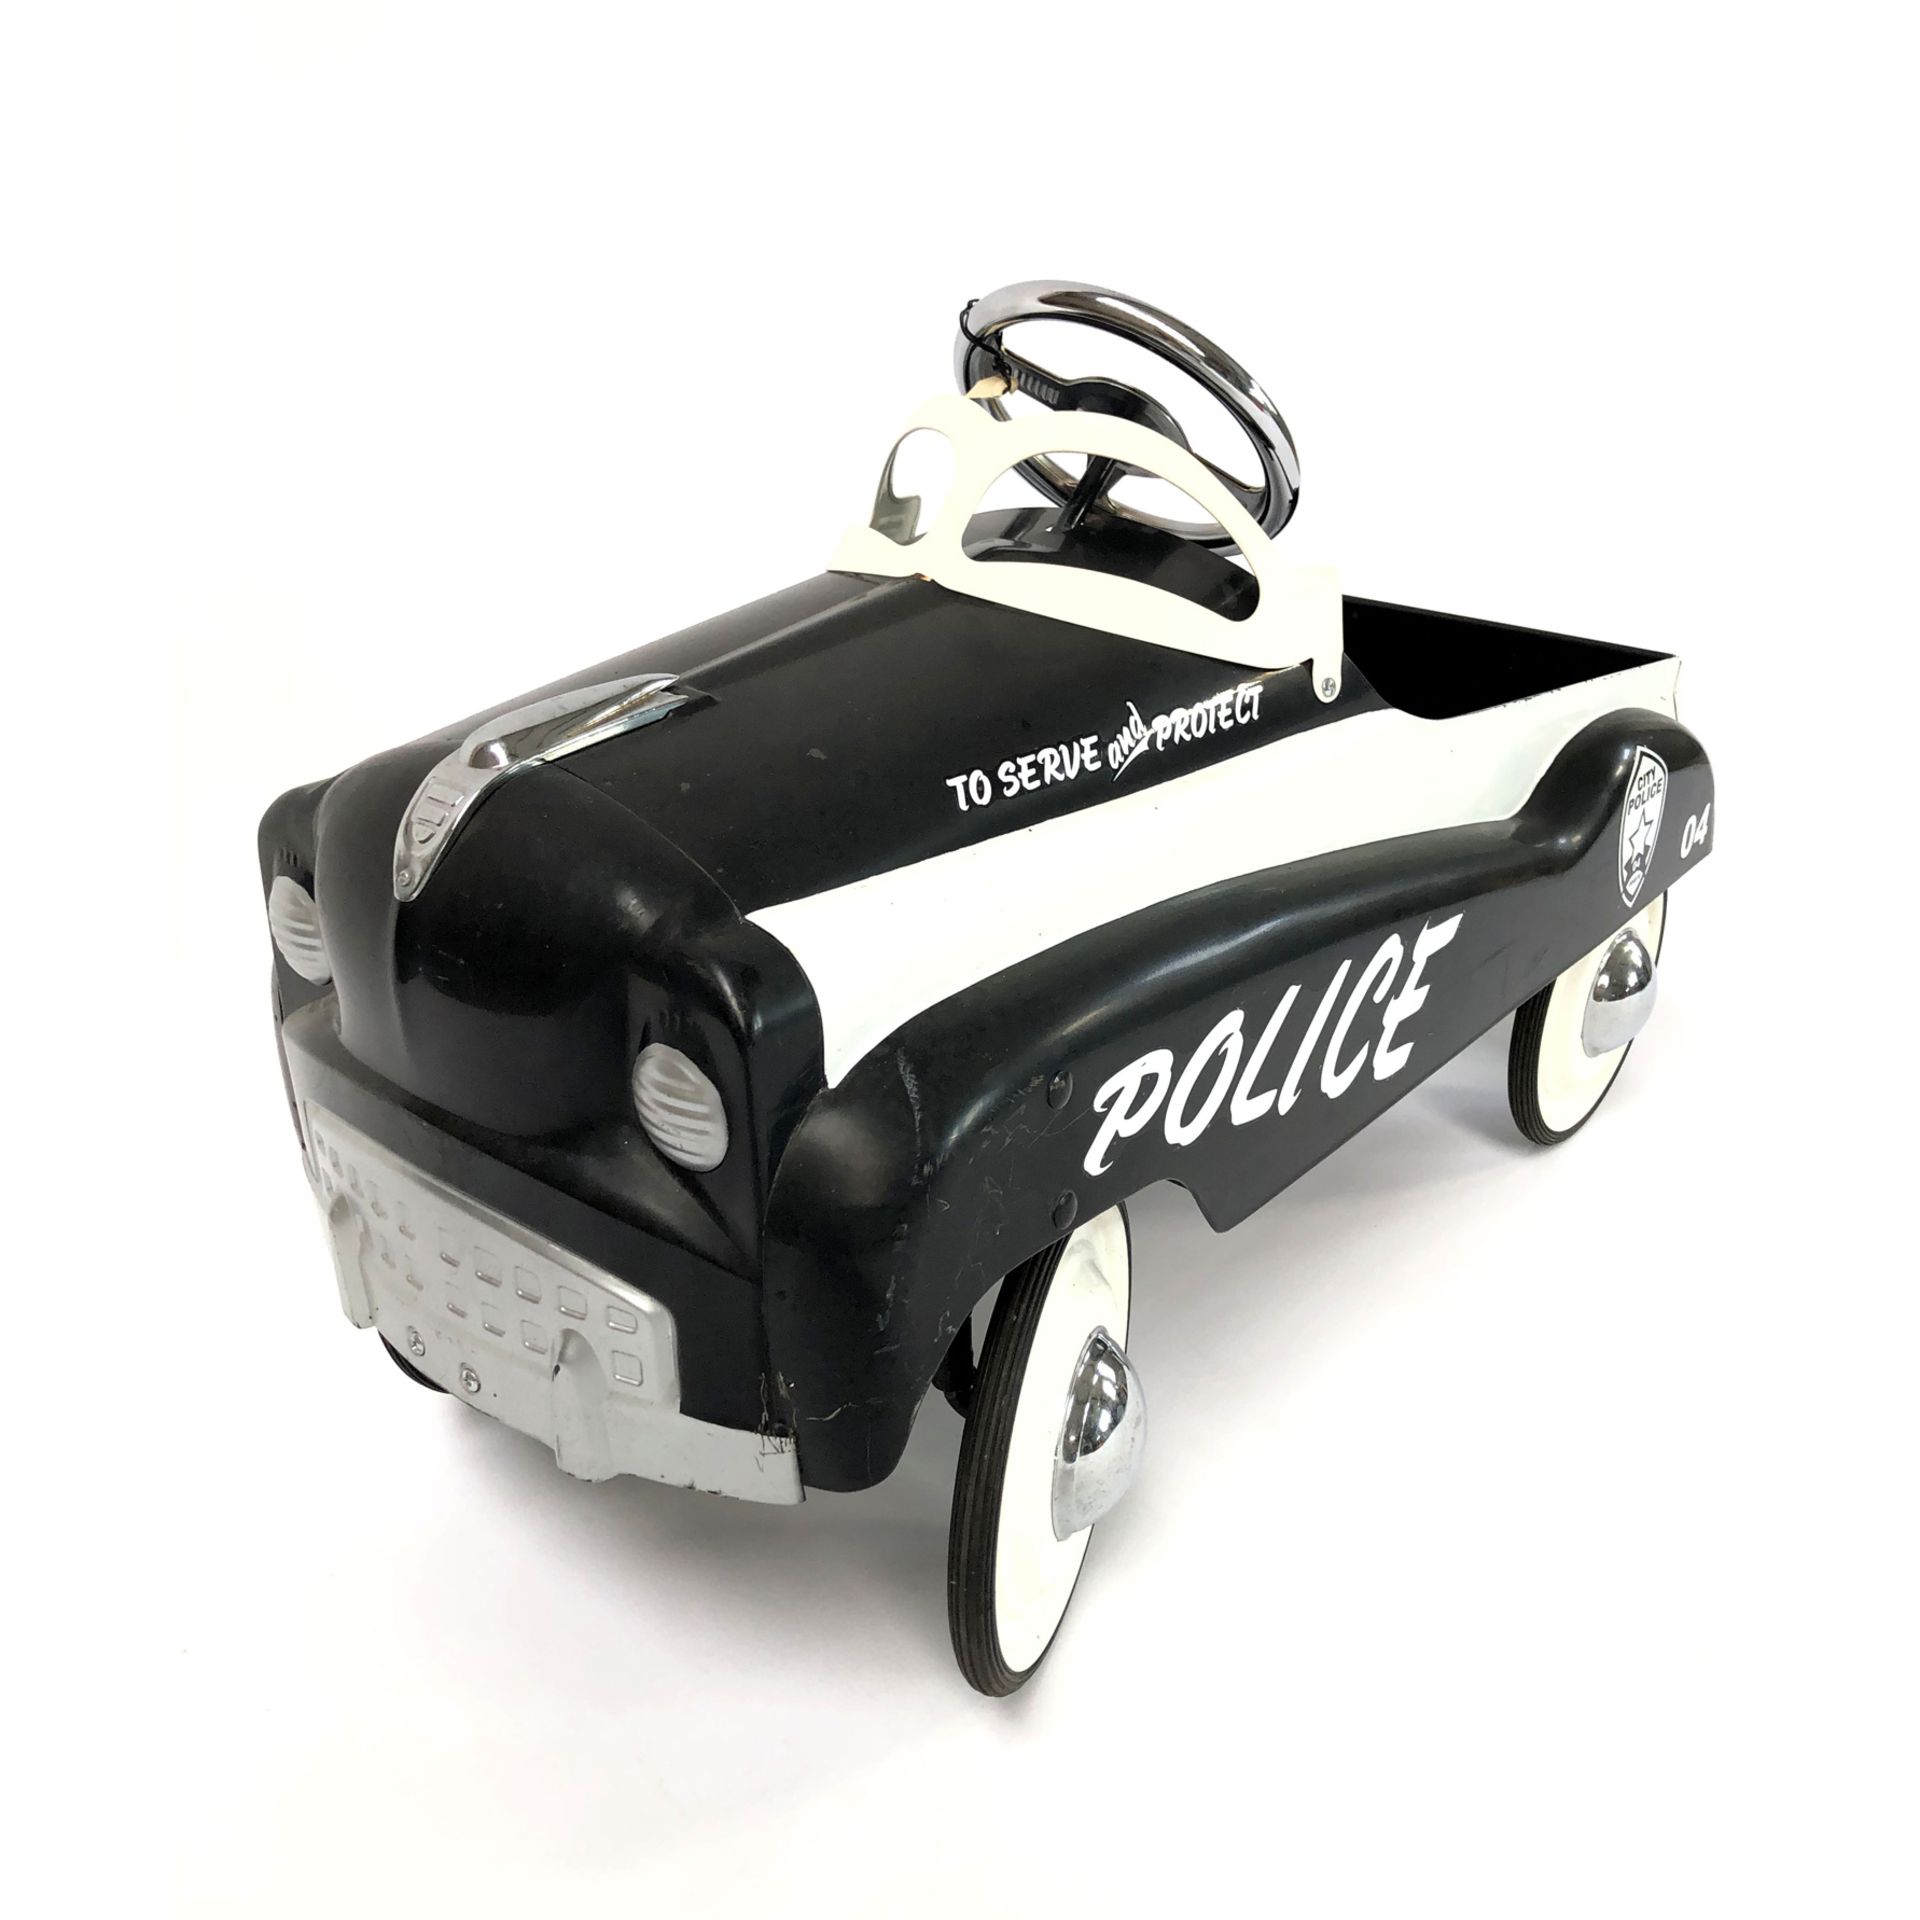 Reproduction Children's Metal Police Pedal Car